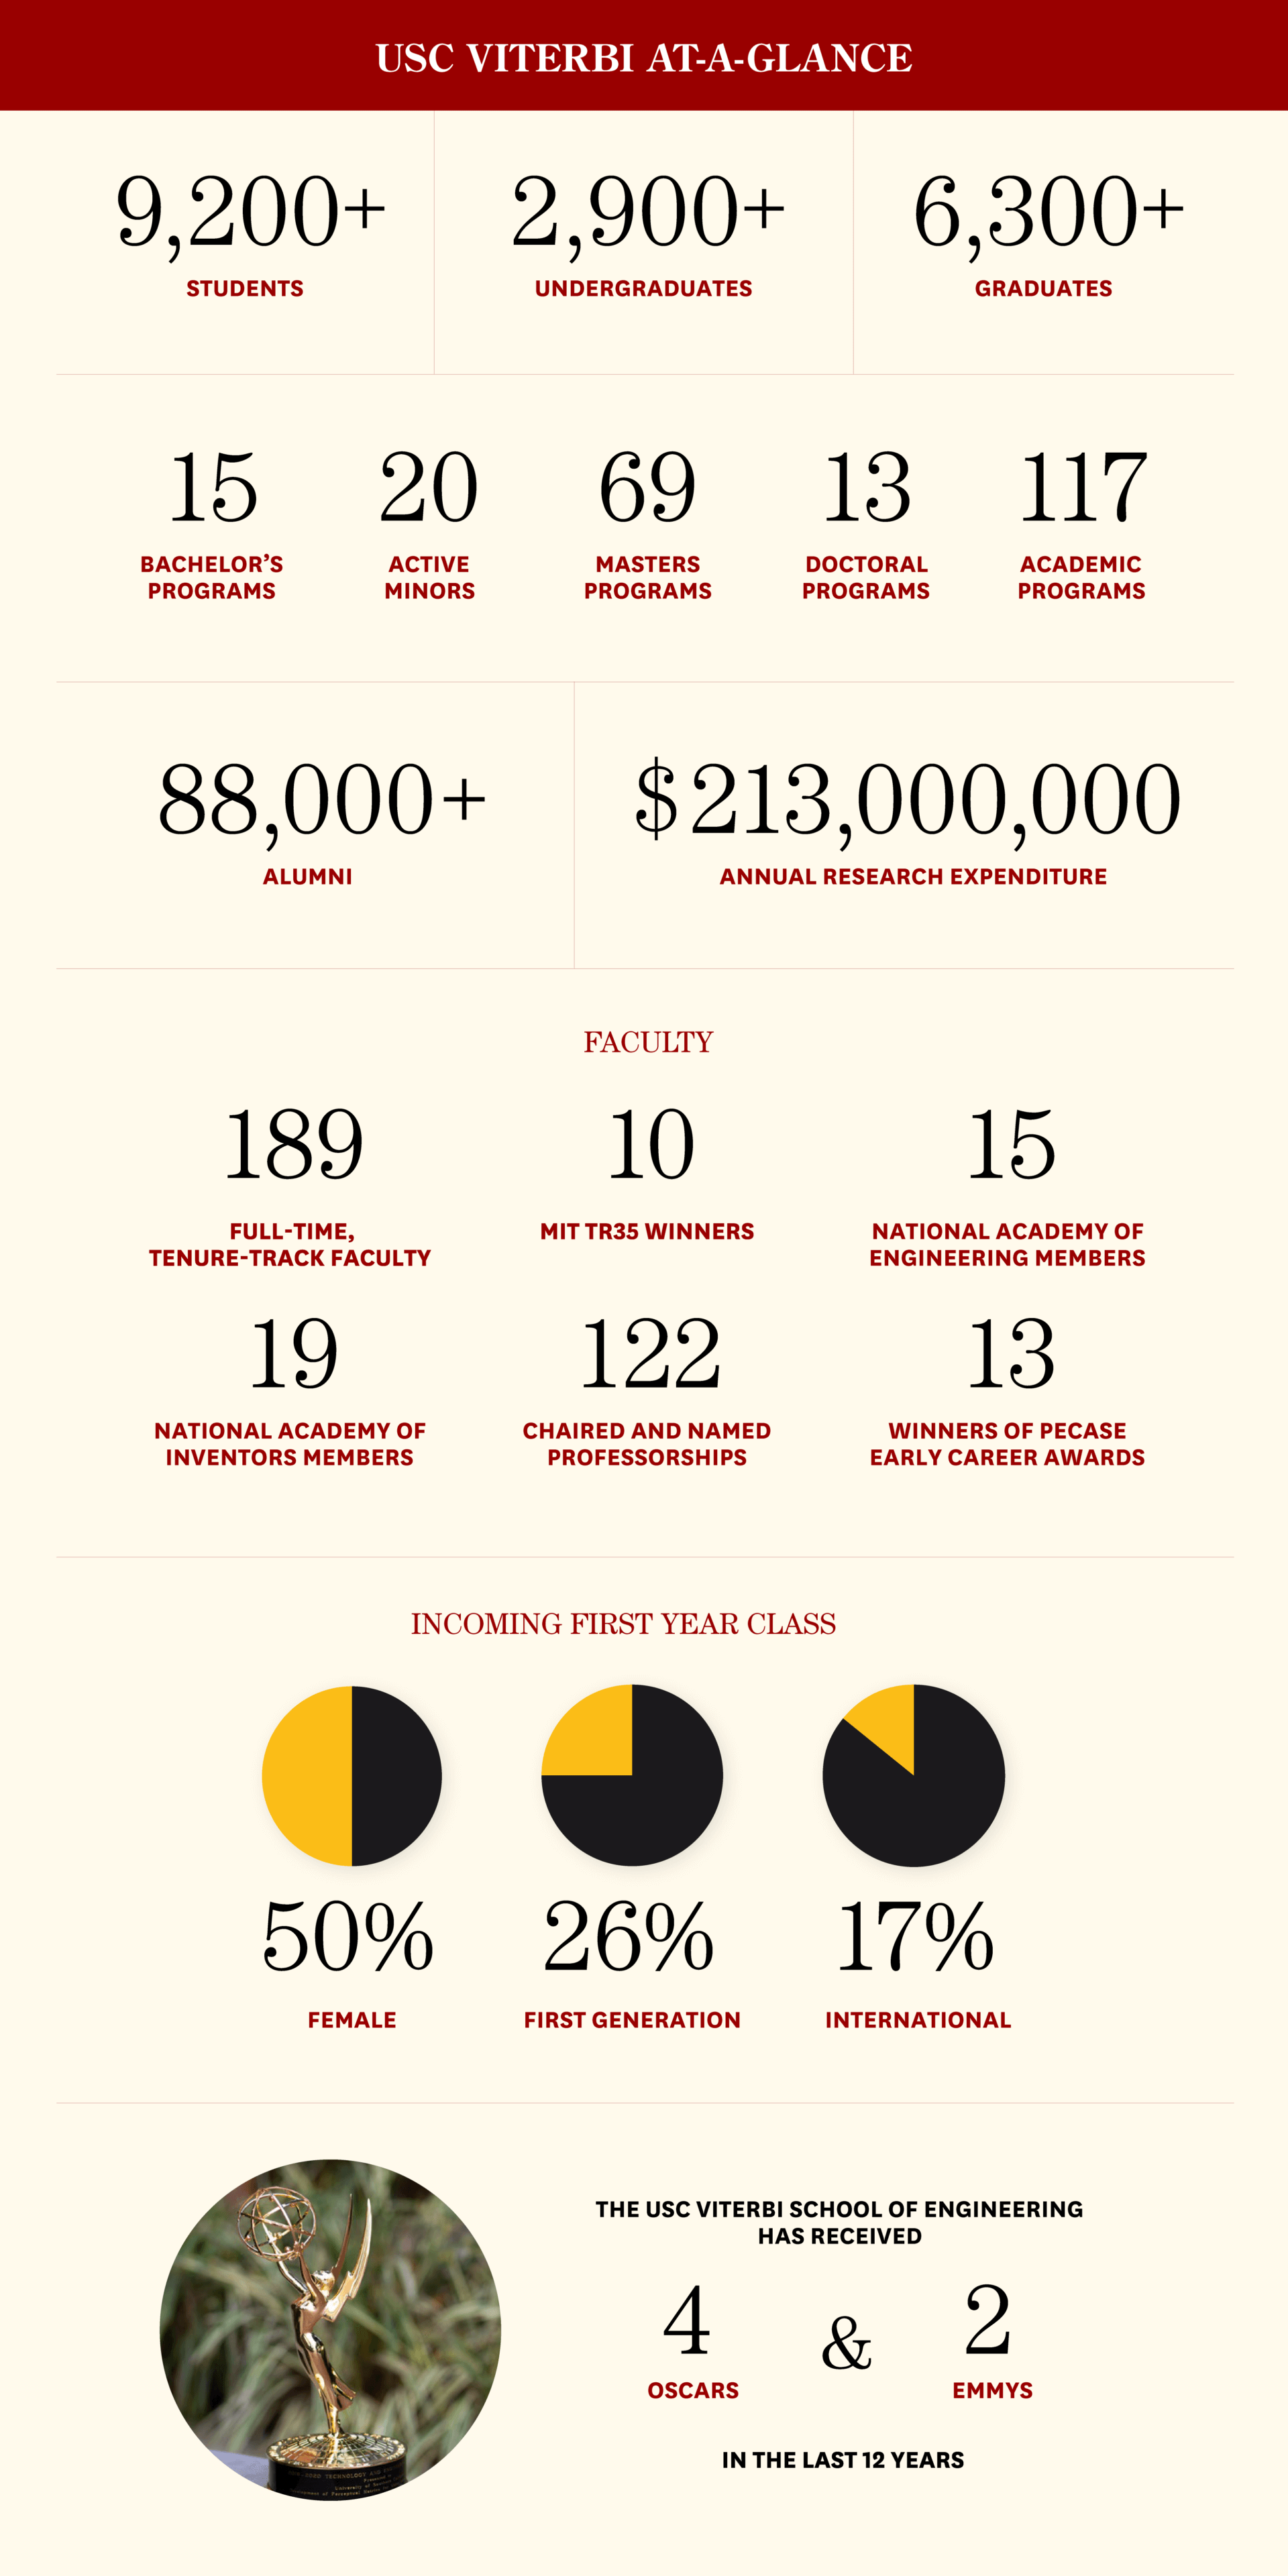 USC Viterbi At-a-Glance infographic about current facts and figures related to the school